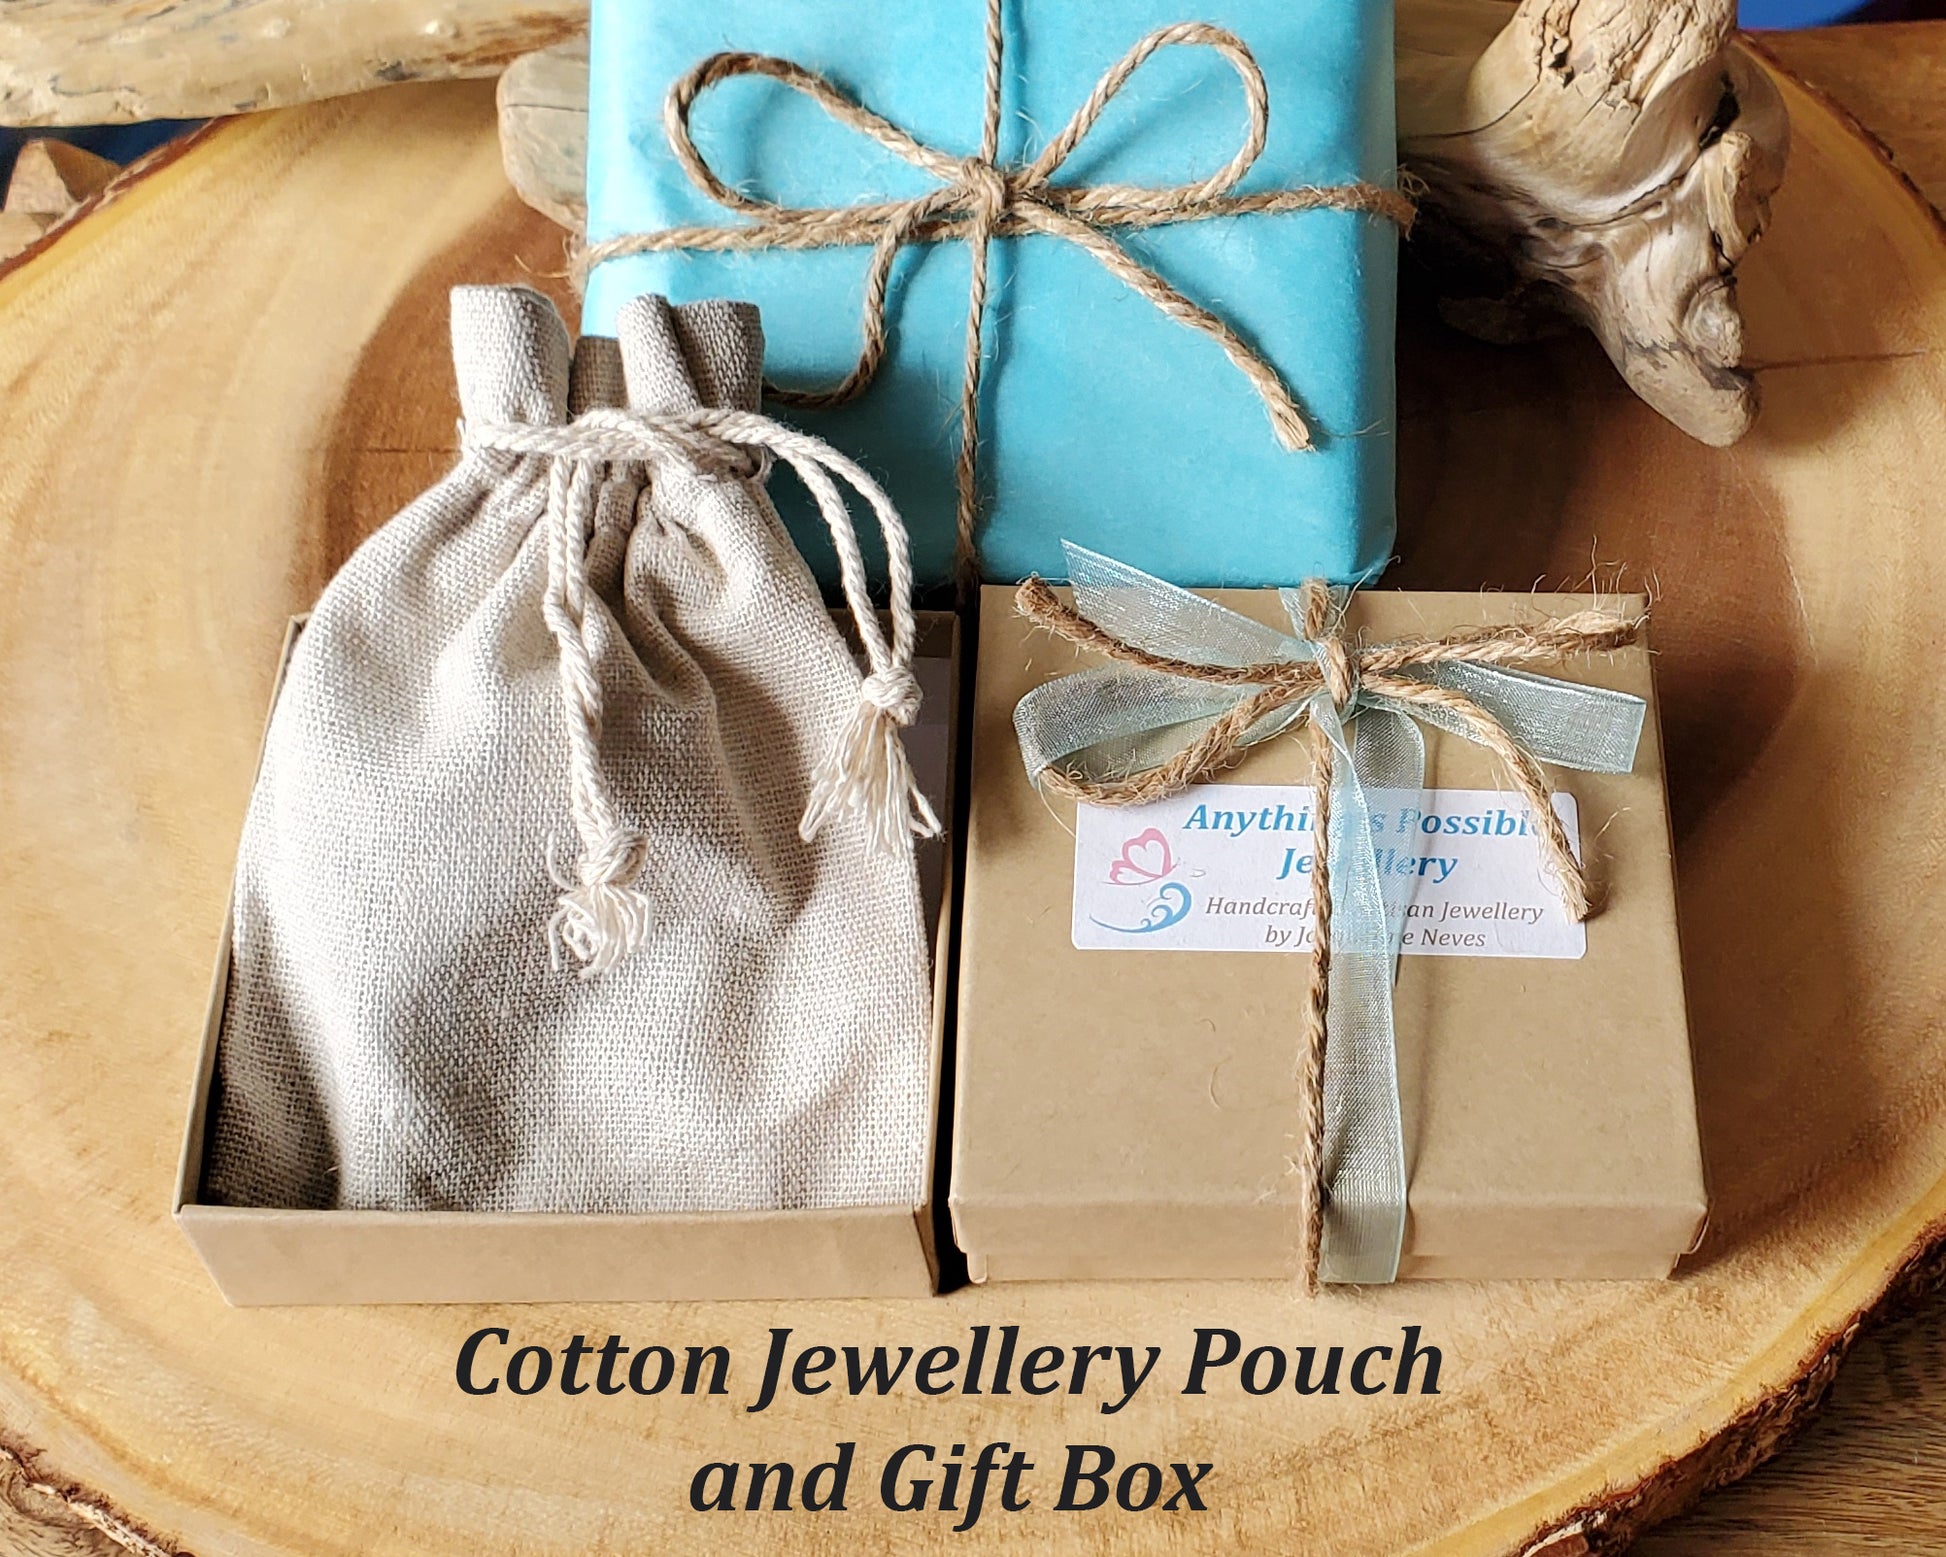 Eco Friendlier Recycled Paper Gift Box, Reusable Cotton Jewellery Pouch, Tissue Paper, Ribbon, and Twine